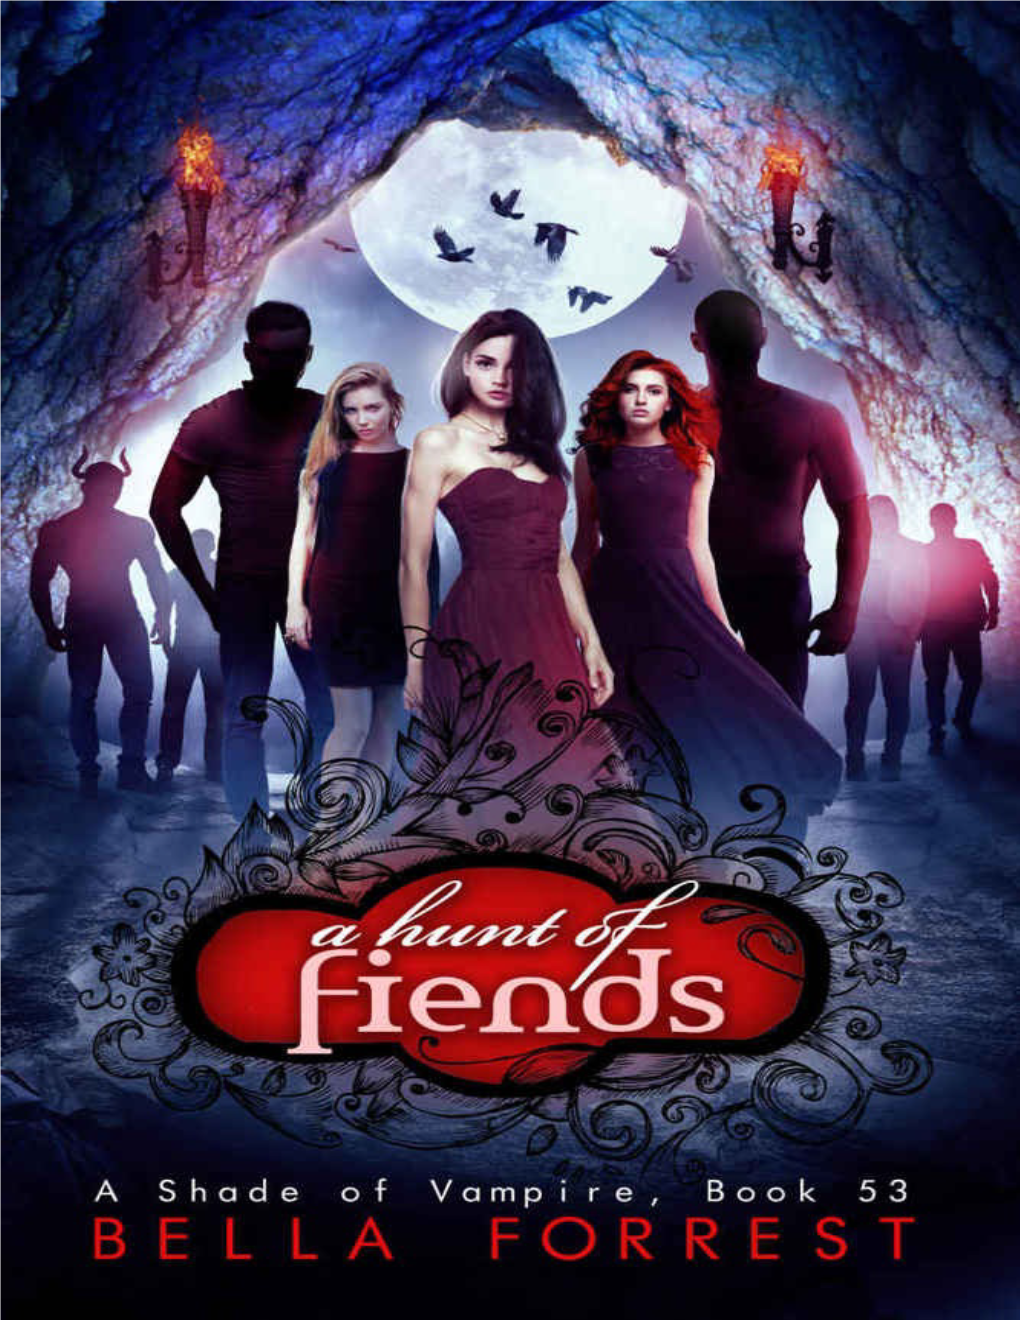 A Shade of Vampire 53: a Hunt of Fiends Bella Forrest Contents